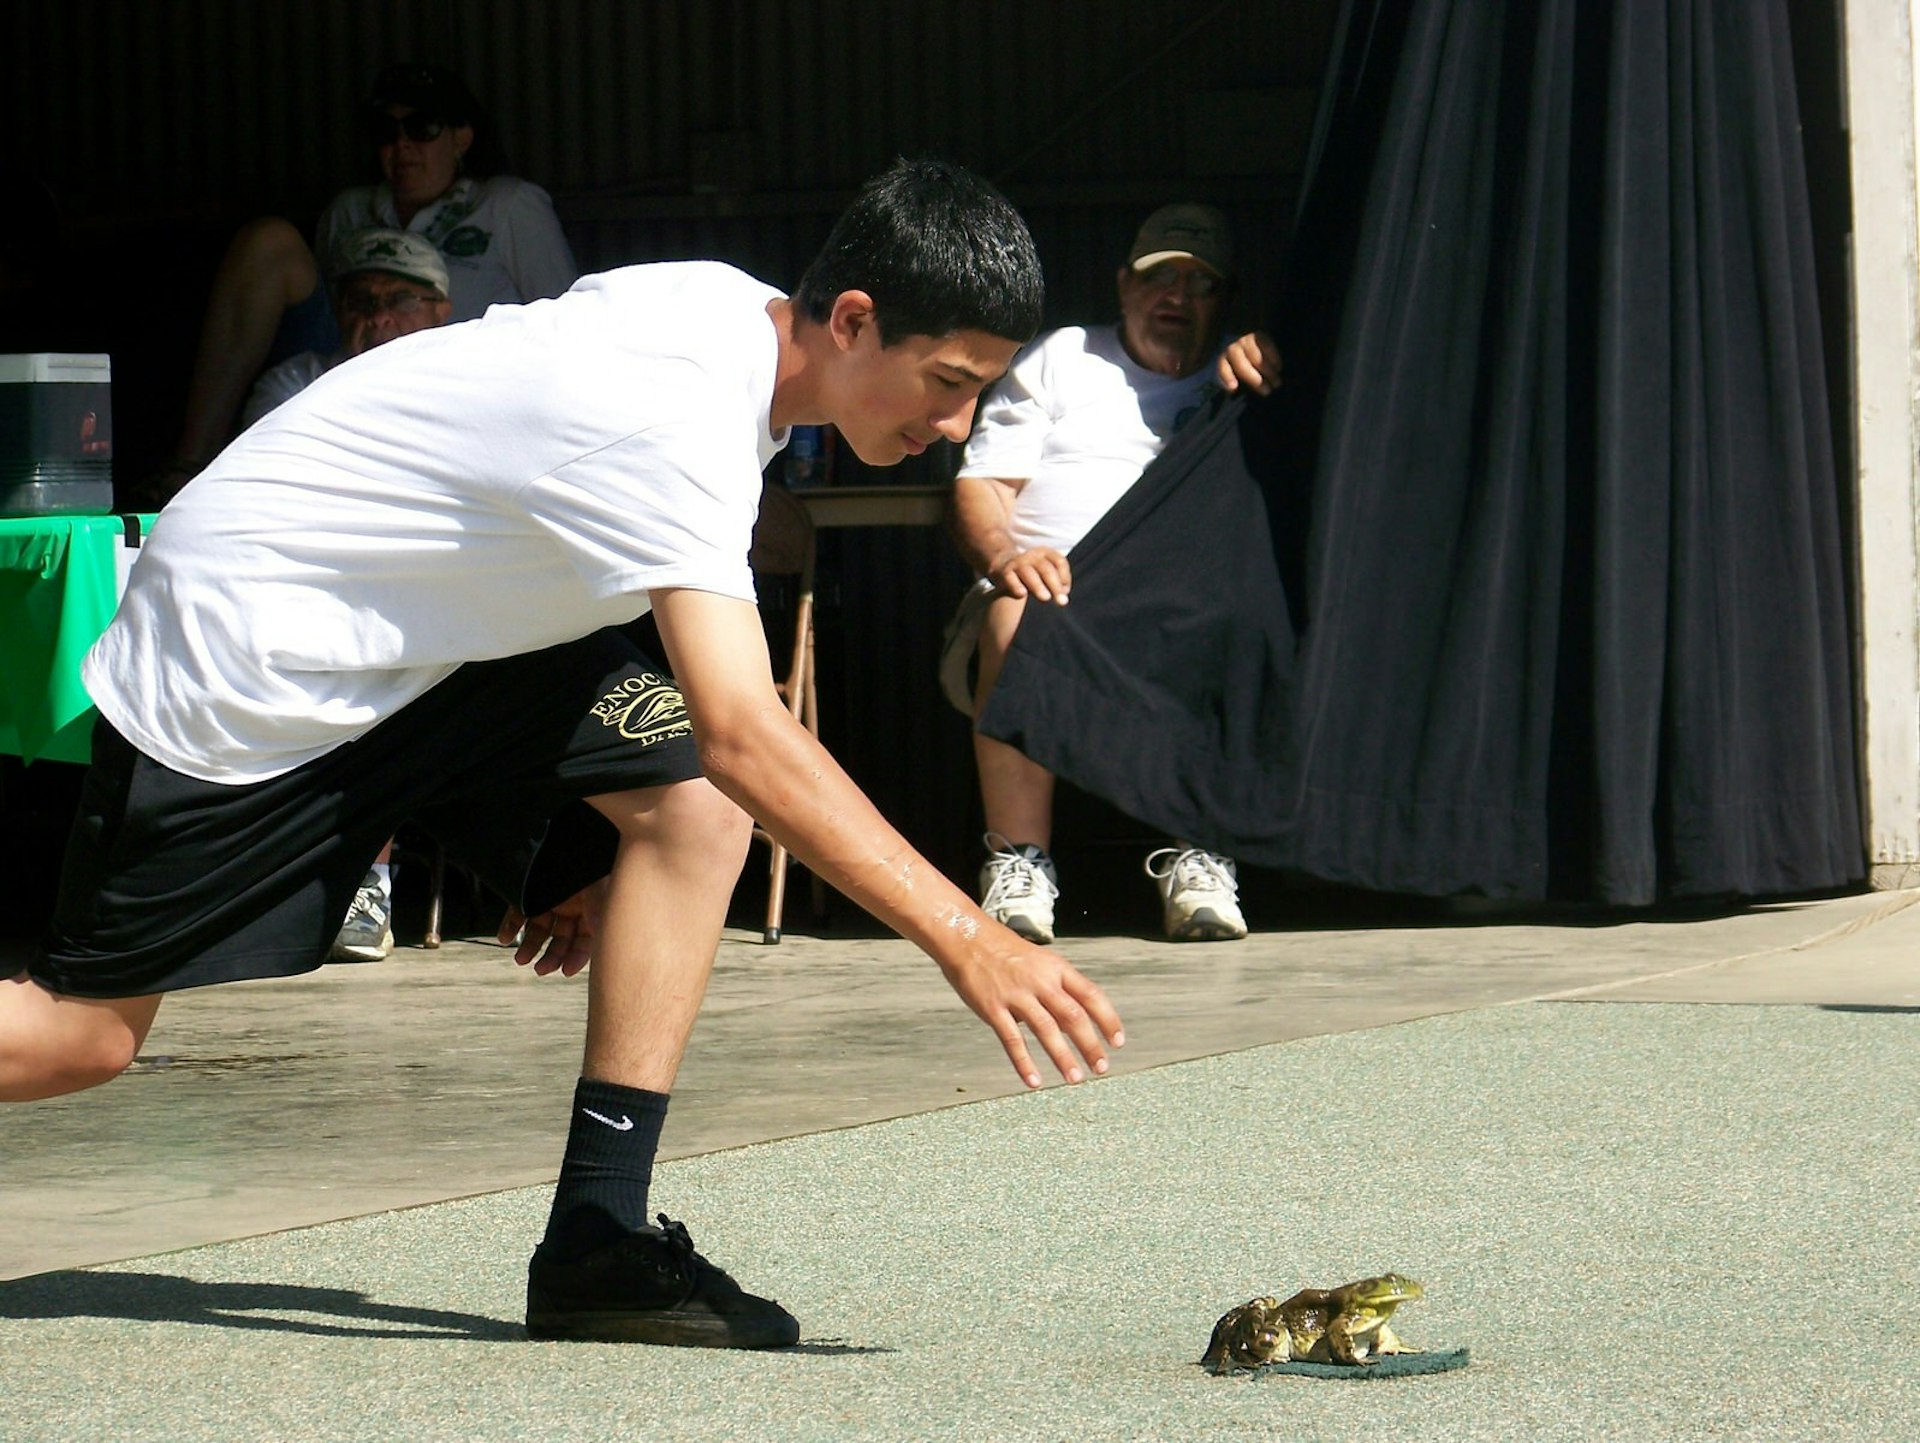 A contestant urges their frog to jump as part of the annual frog-jumping festival at Angels Camp, California © mikluha_maklai / Shutterstock